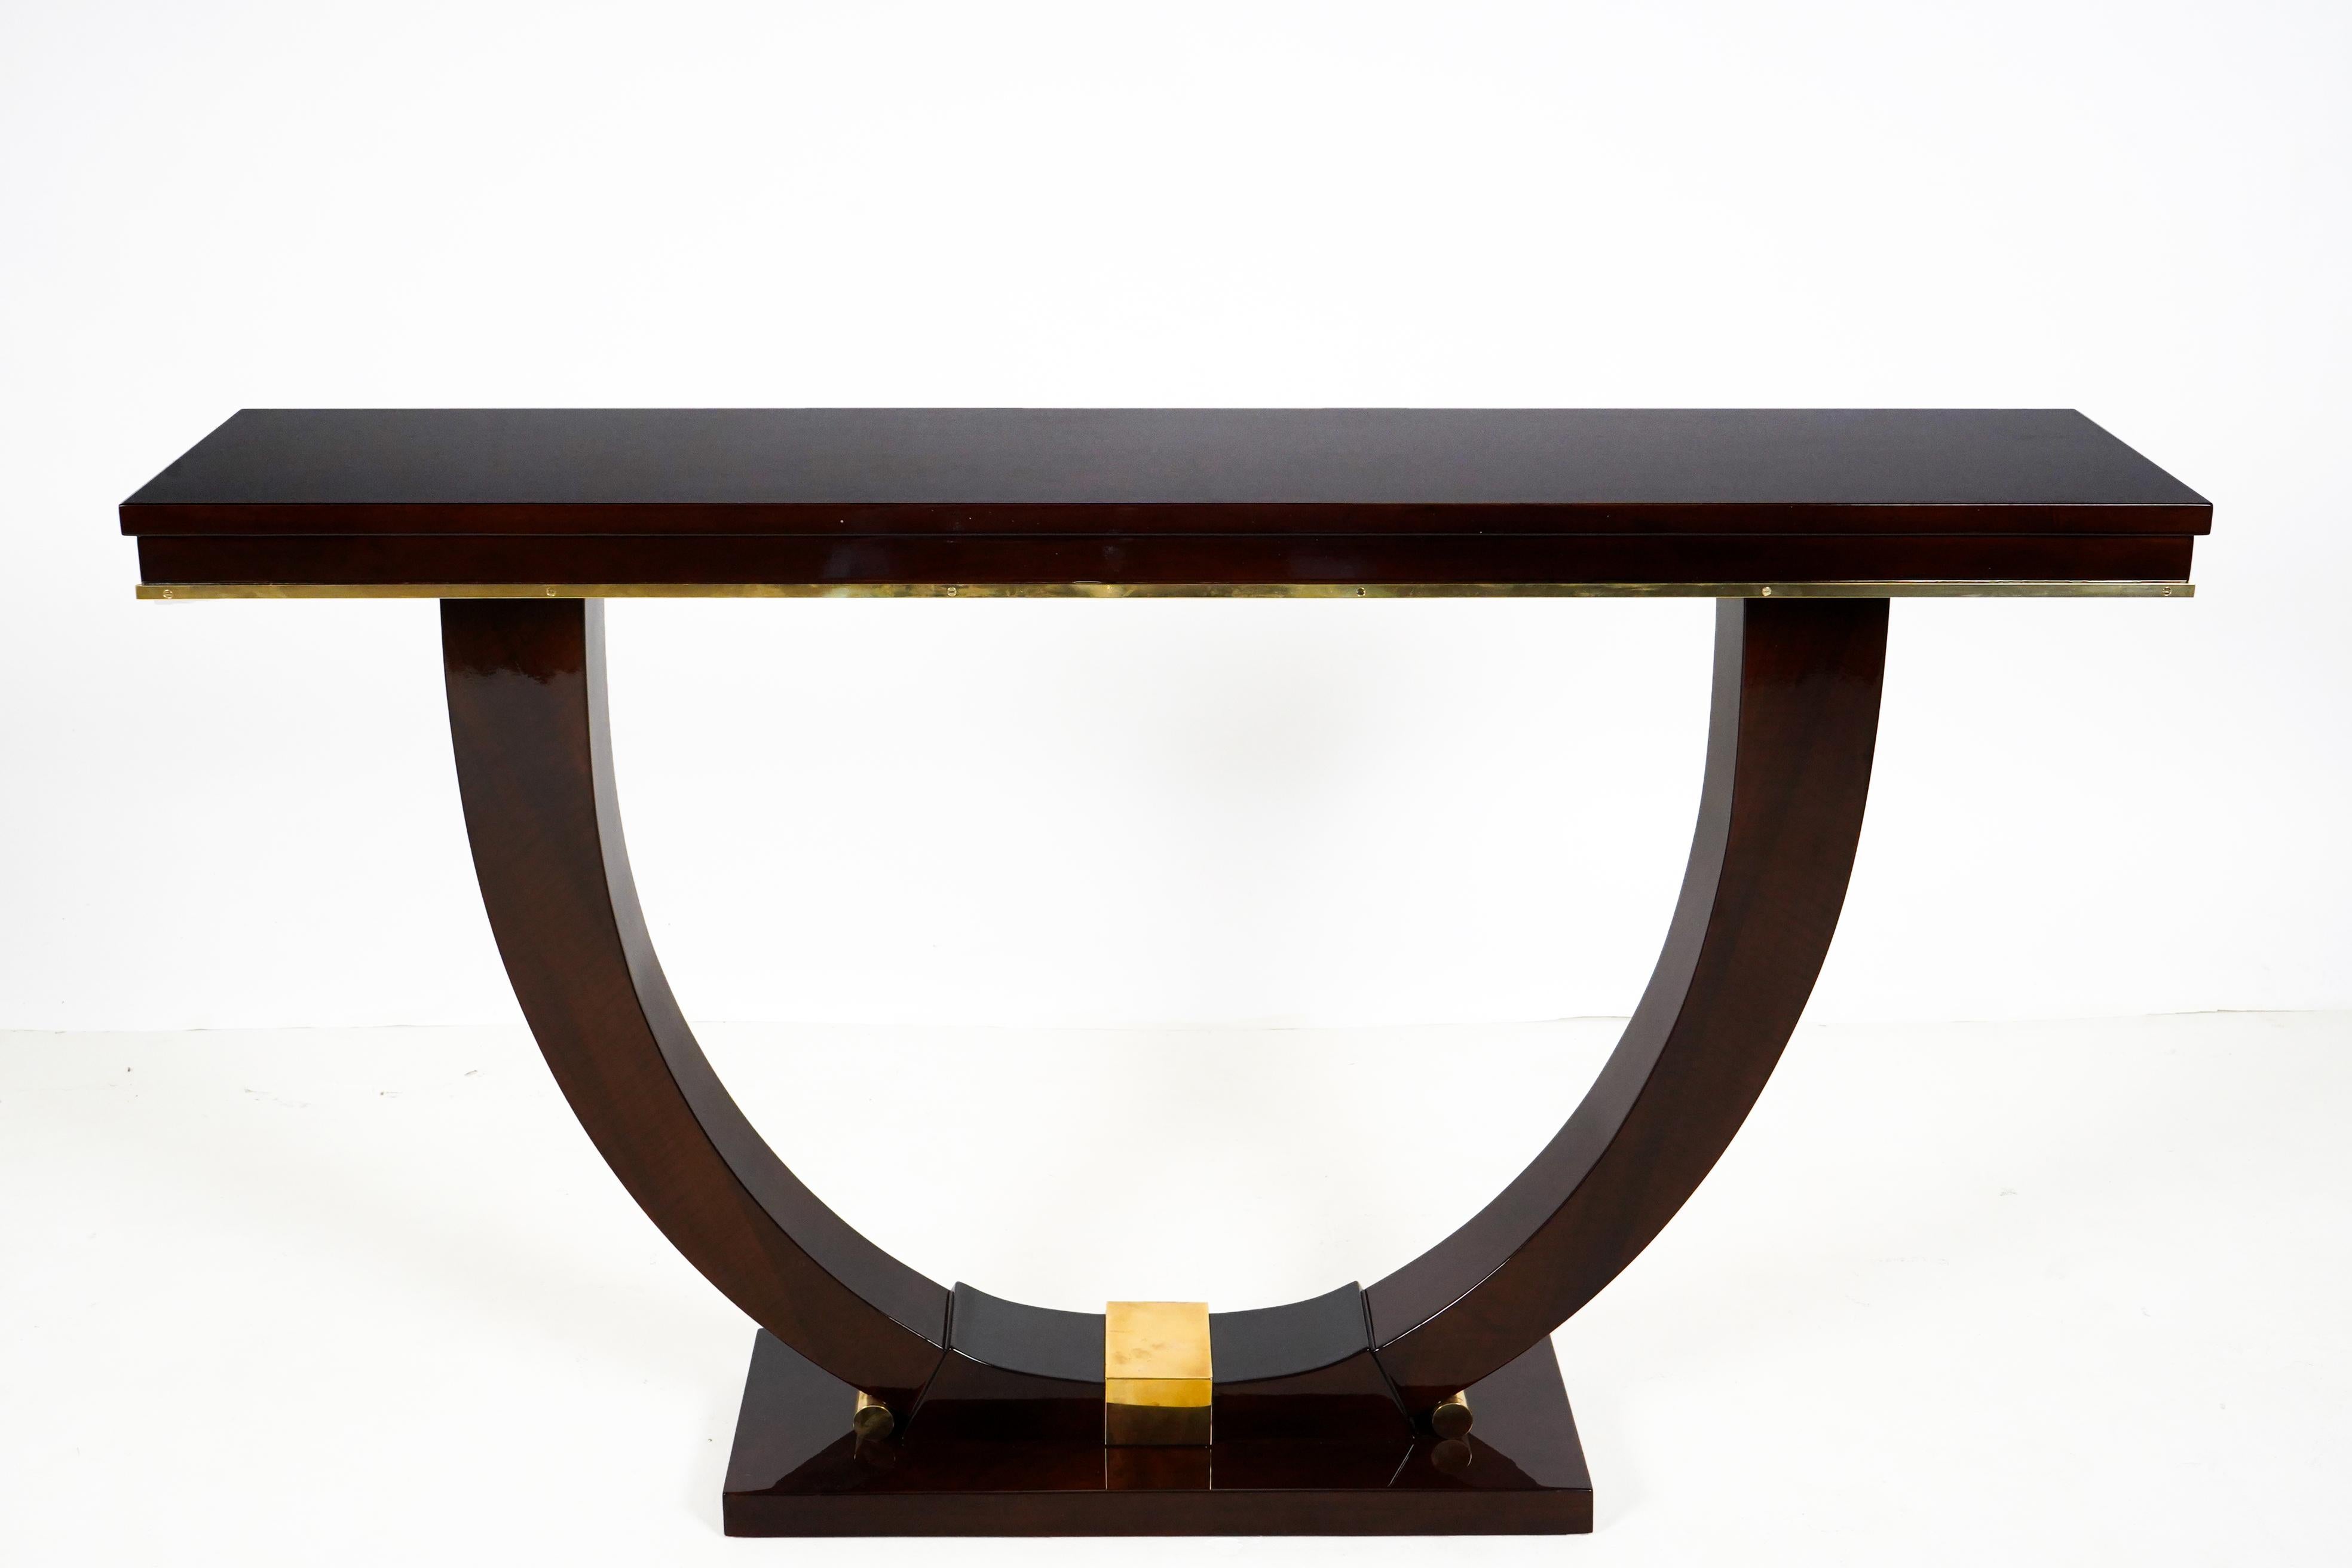 This classic Art Deco console is a contemporary piece based on a vintage French Art Deco design. Hungarian furniture makers mastered the art of making veneered furniture as early as the Biedermeier Period (in the early 1800's). They thrived through